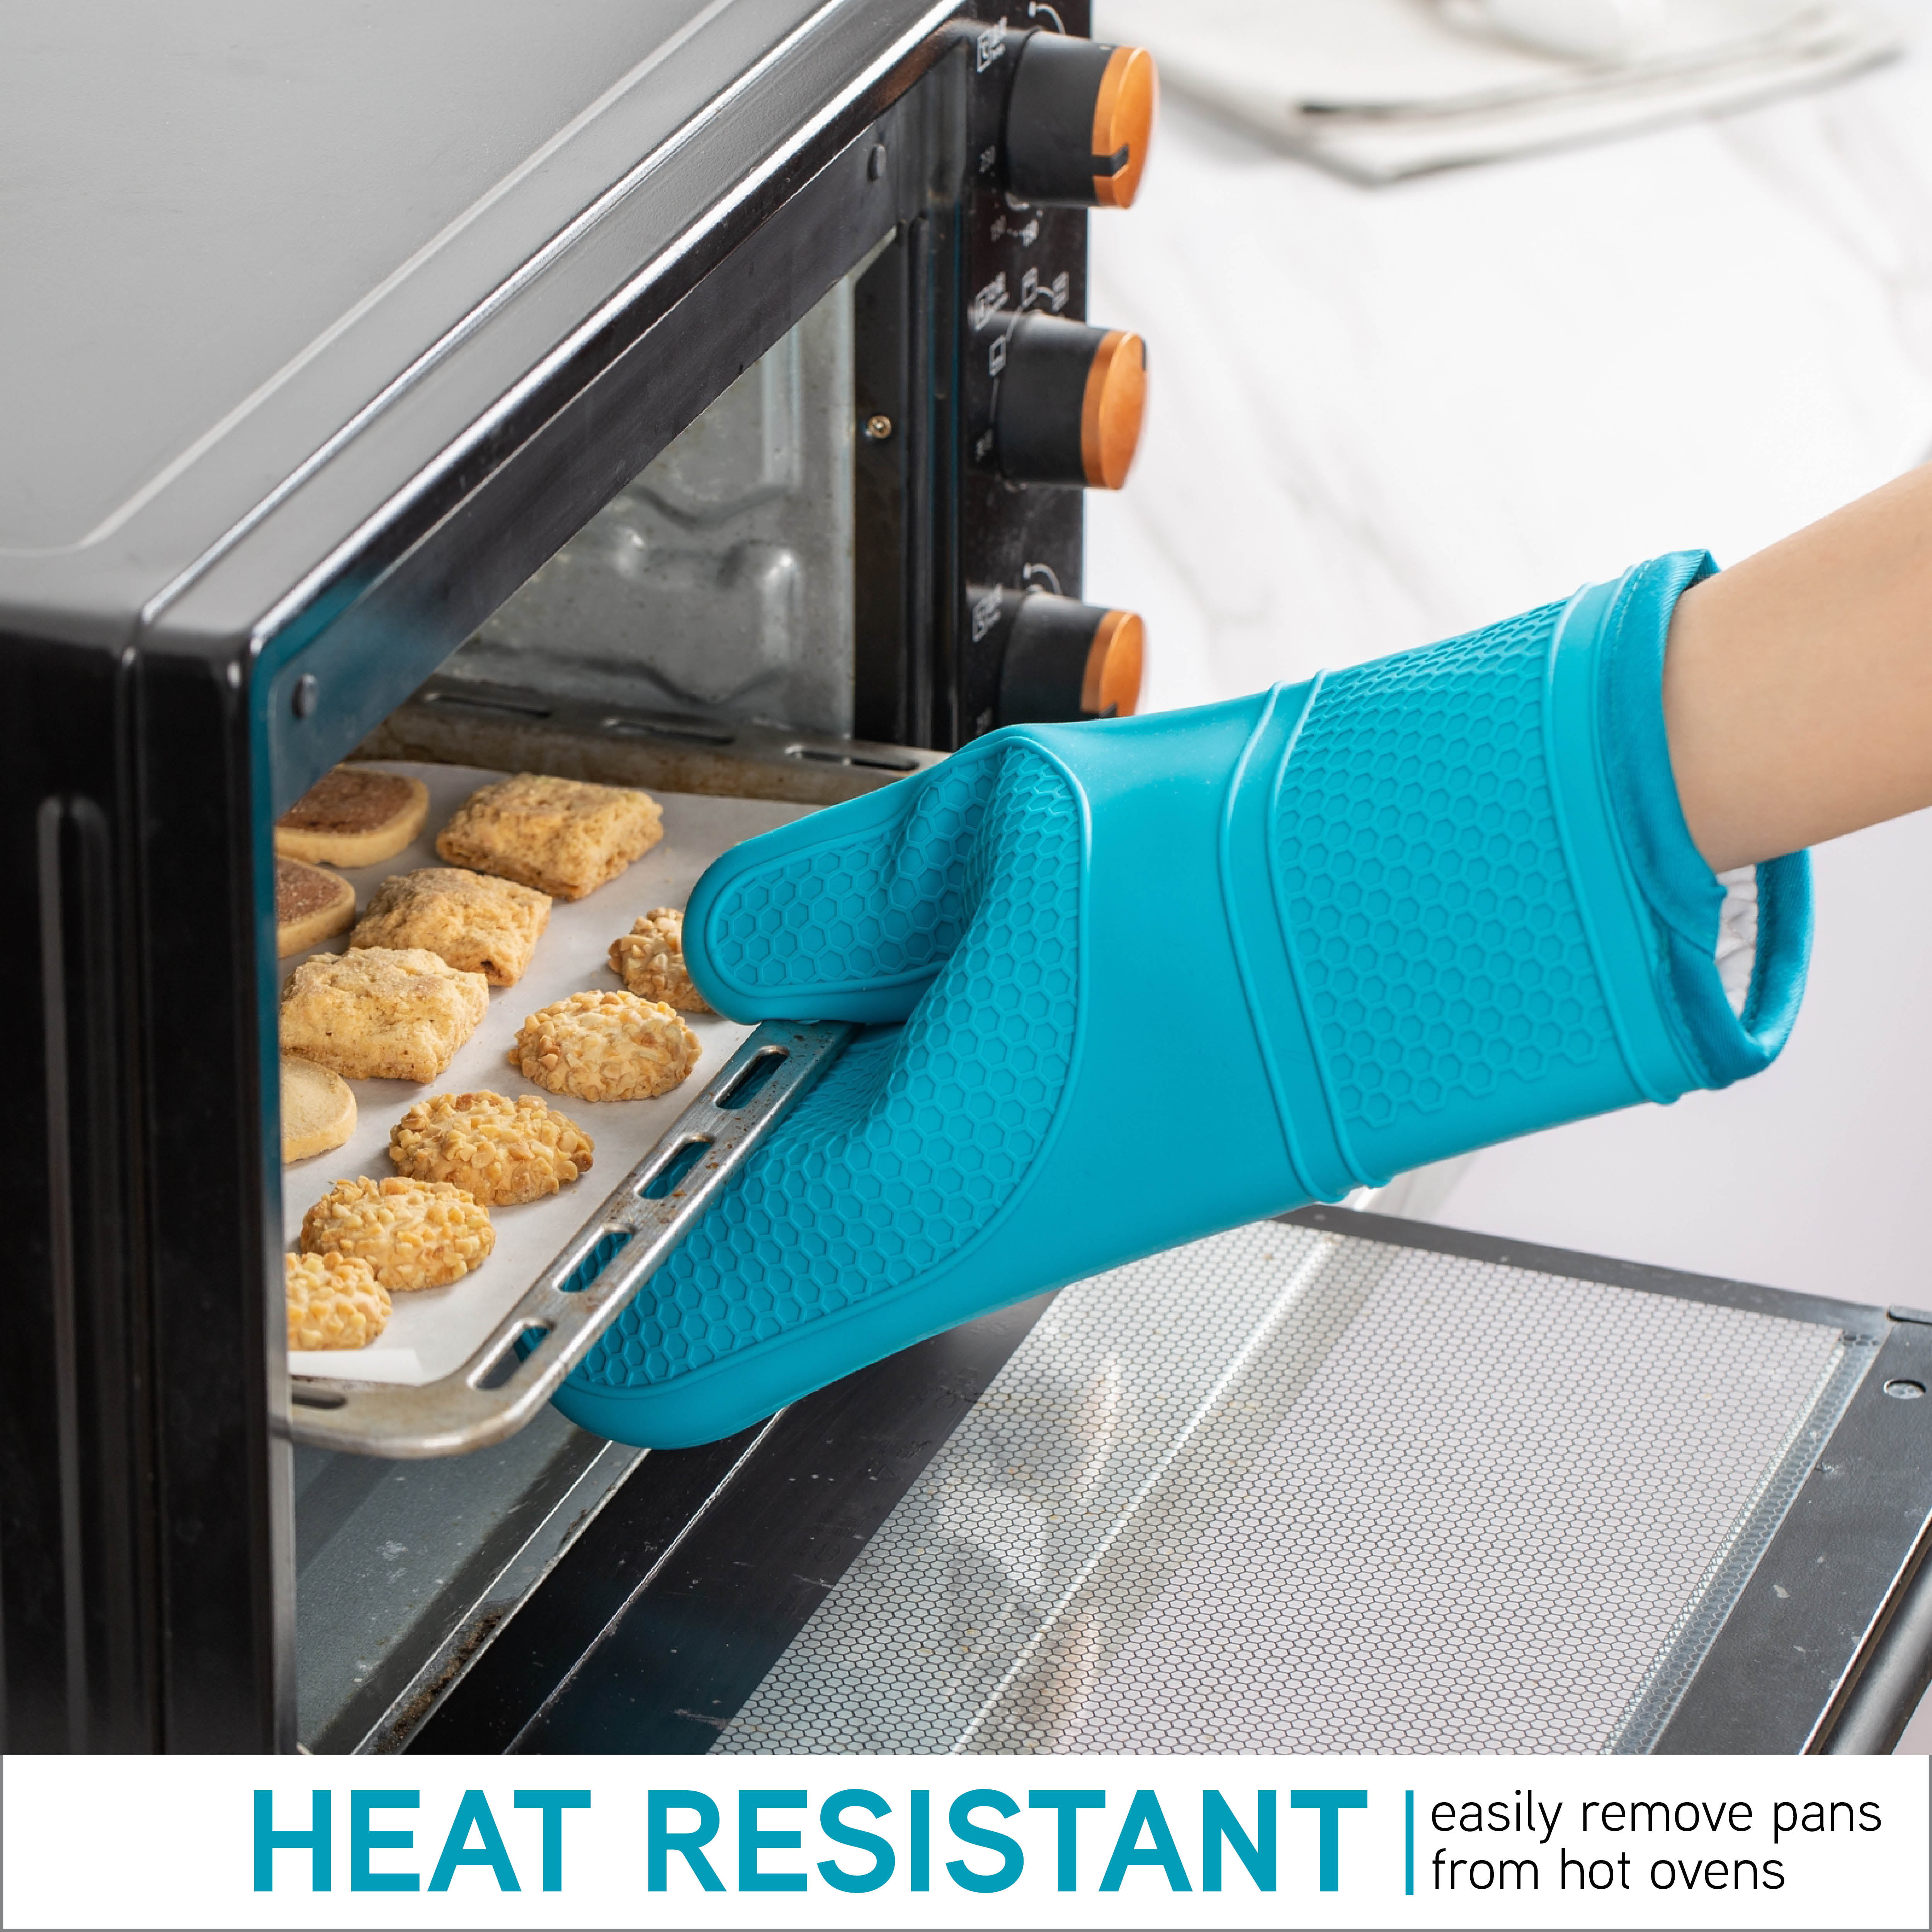 Choice 17 Silicone-Coated Oven / Freezer Mitts